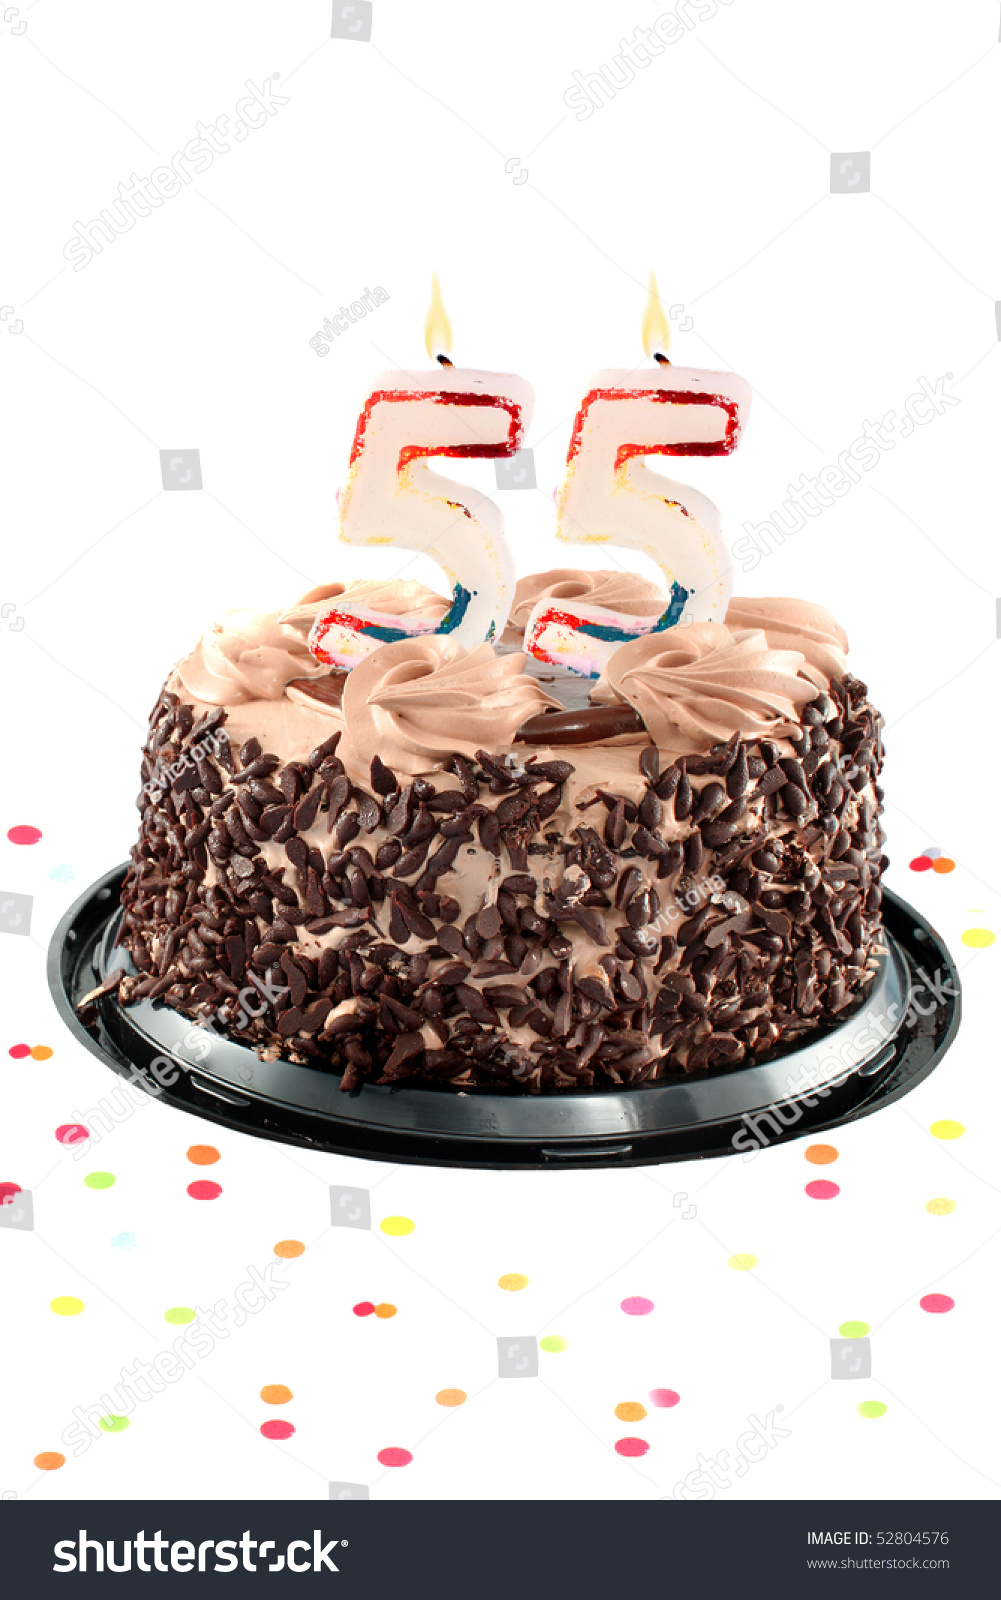 191 Birthday cake with candles 55 Images, Stock Photos & Vectors ...